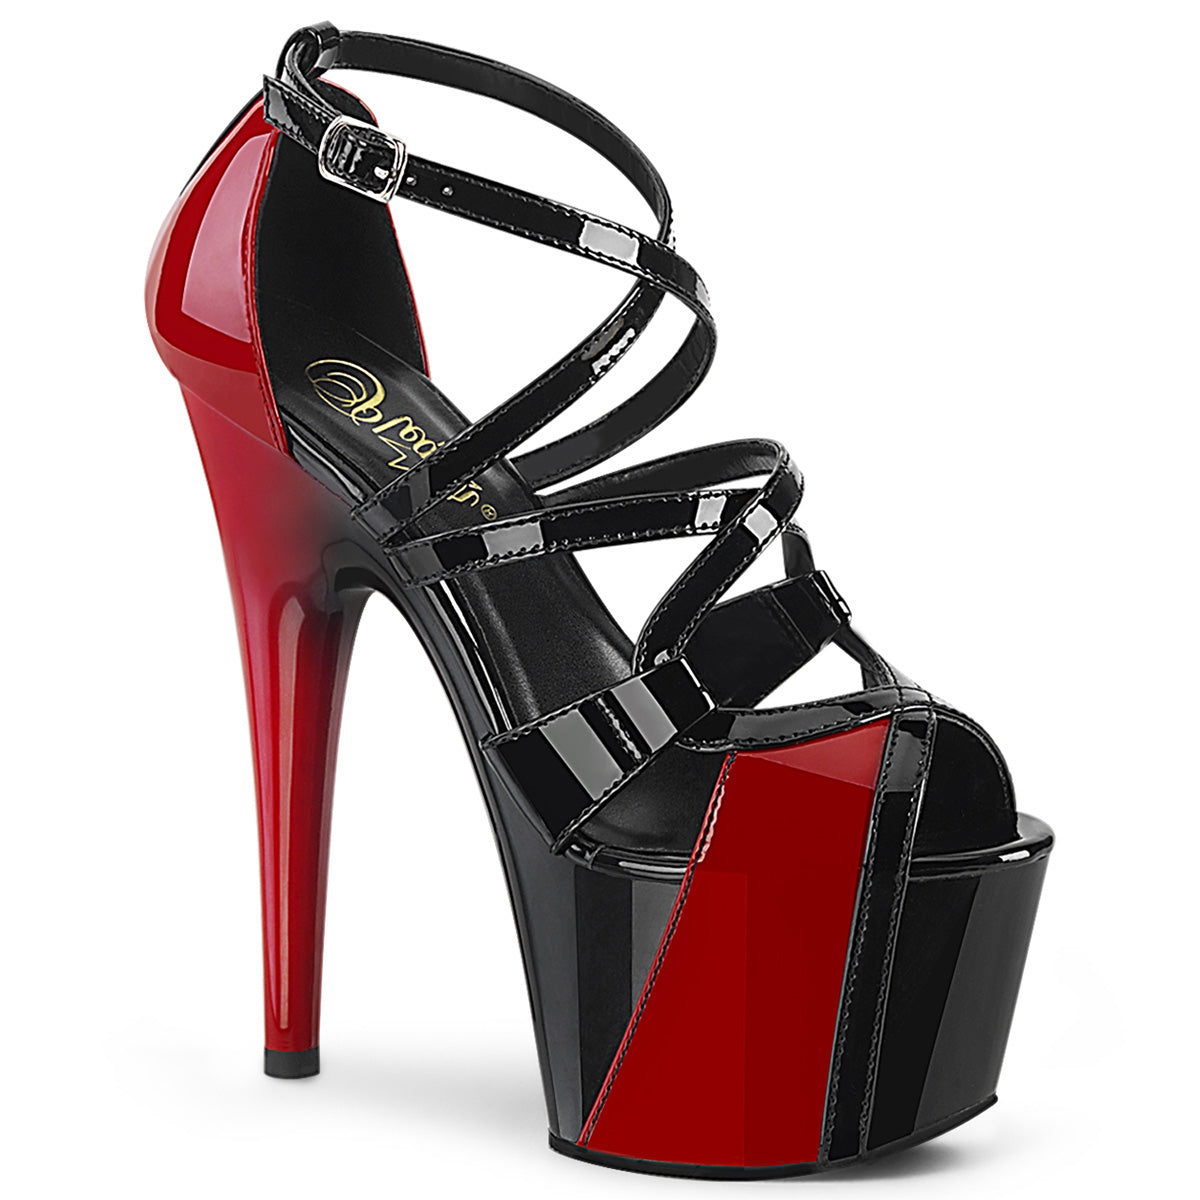 ADORE-764 Pleaser 7" Heel Black and Red Strippers Sandals-Pleaser- Sexy Shoes